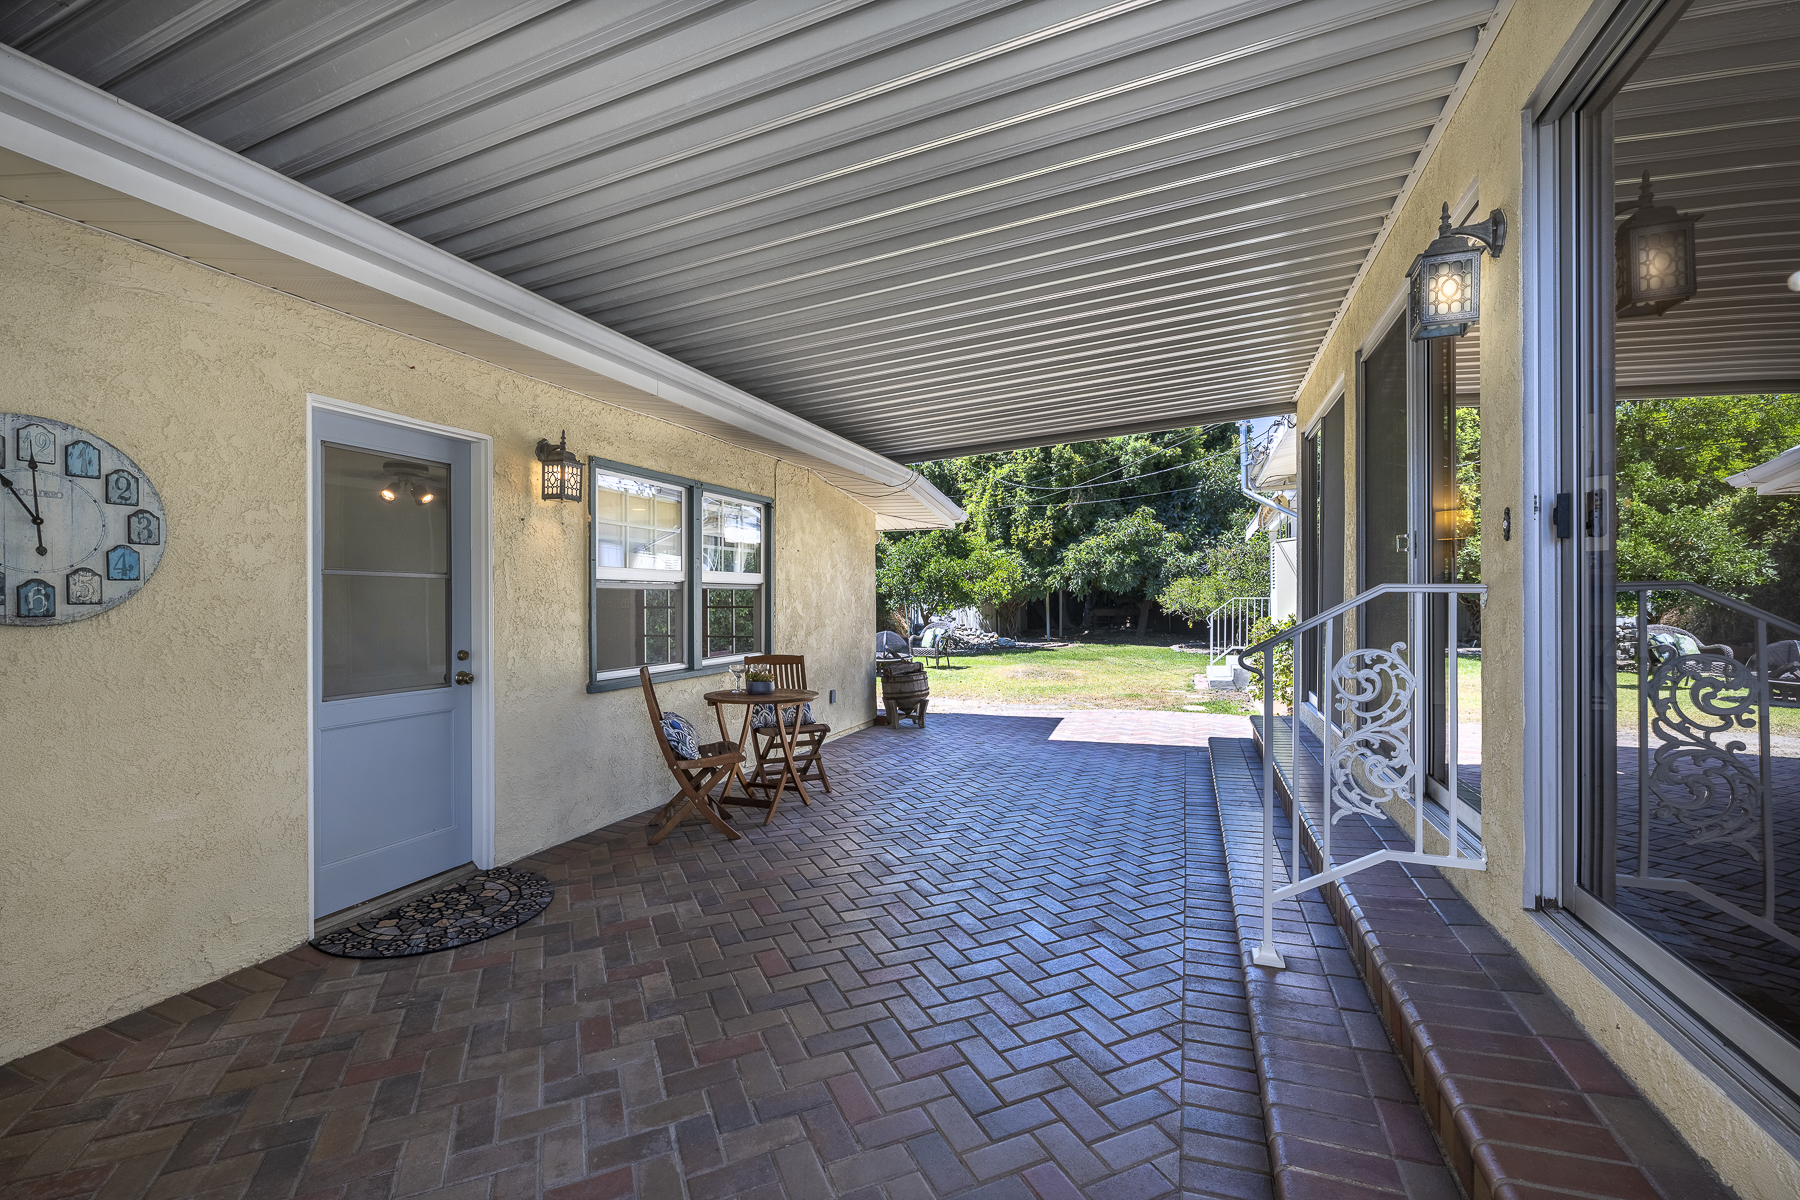 411 Truman Ave, Fullerton, CA 92832: Exterior view of covered patio and iron railing.